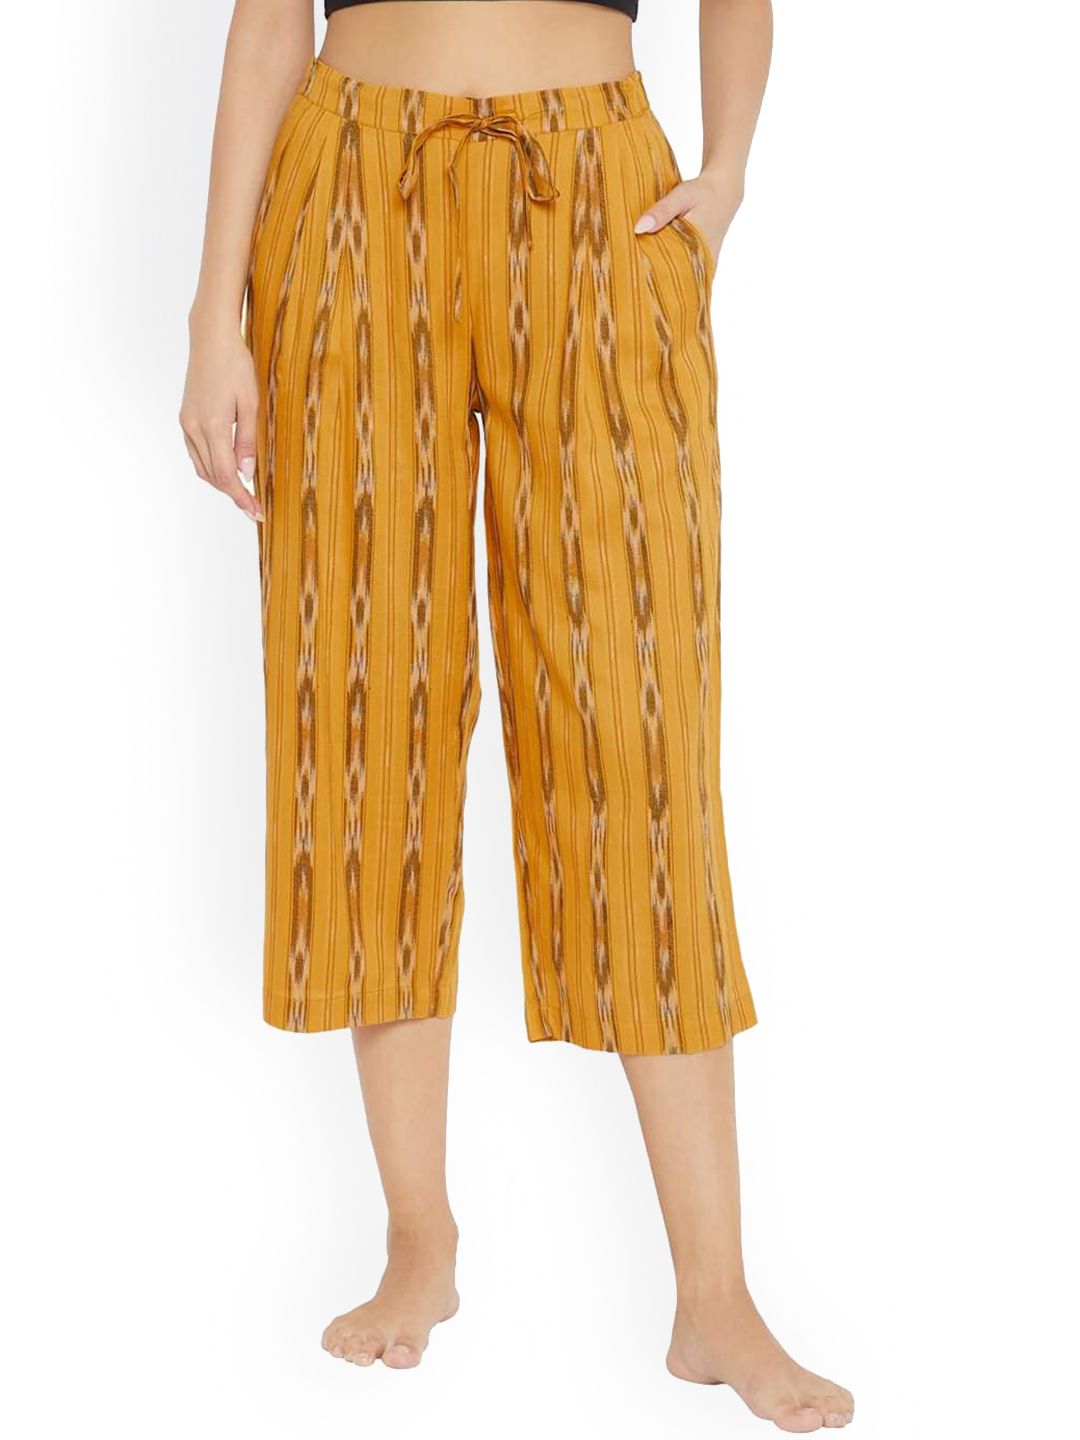 Style SHOES Women Mustard-Yellow & White Printed Cotton Cropped Pyjamas Price in India